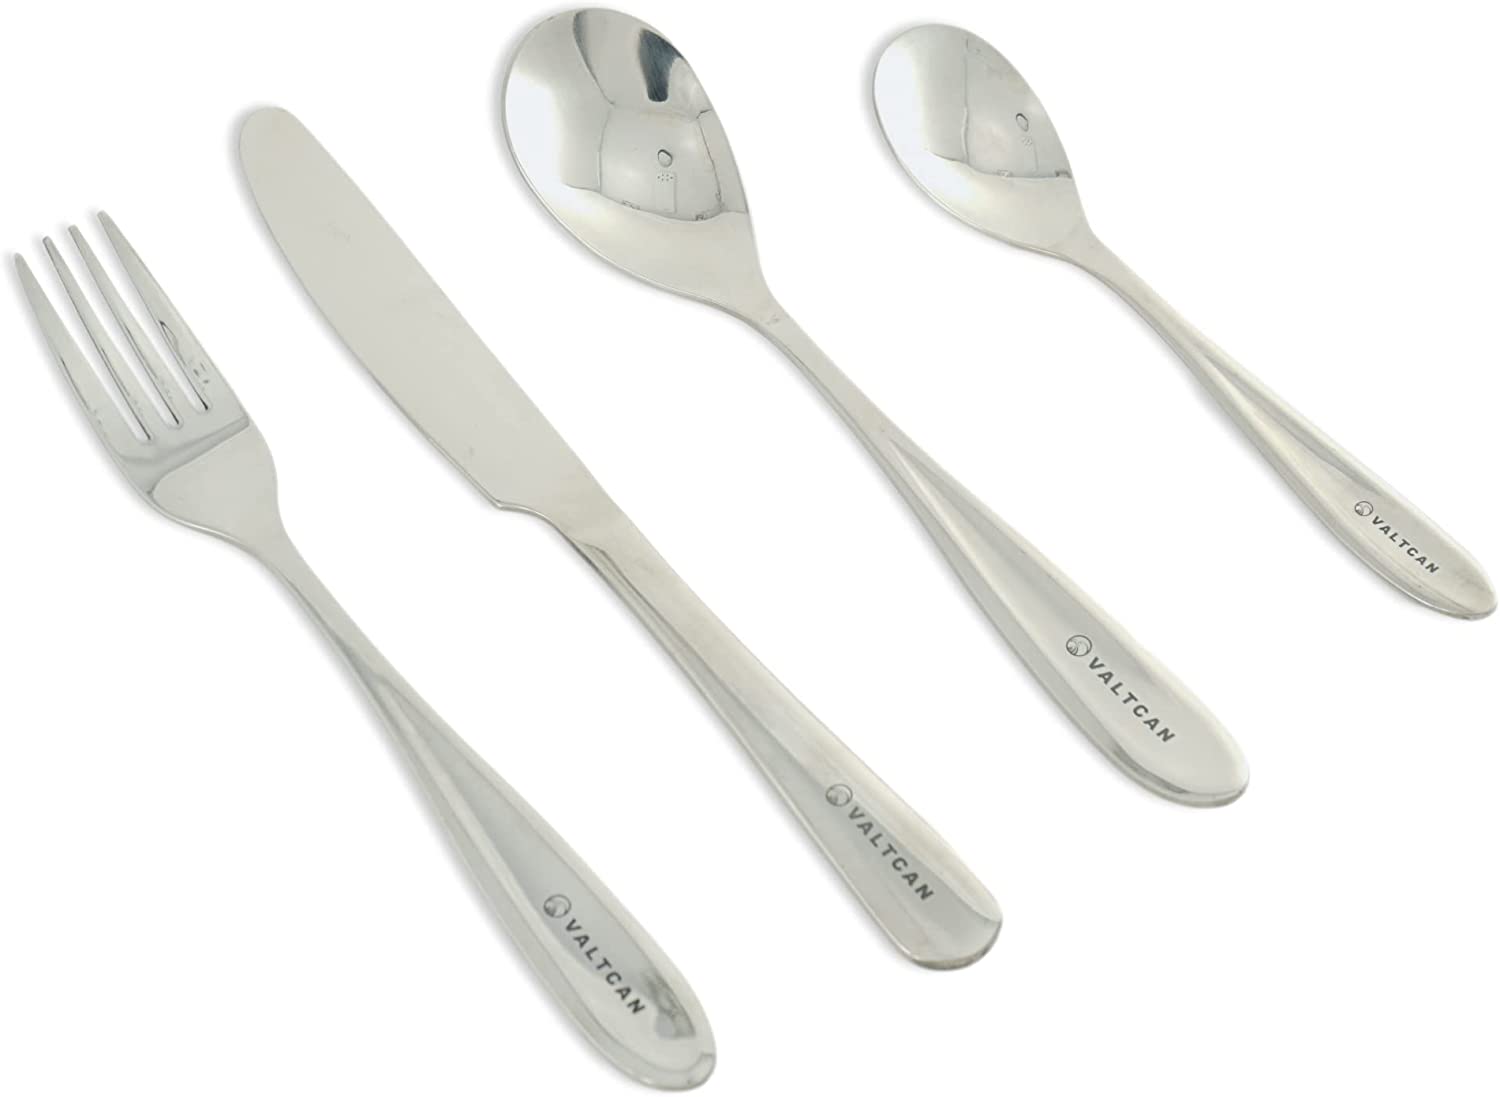 Valtcan Titanium Cutlery with Polished Head 4pc Set